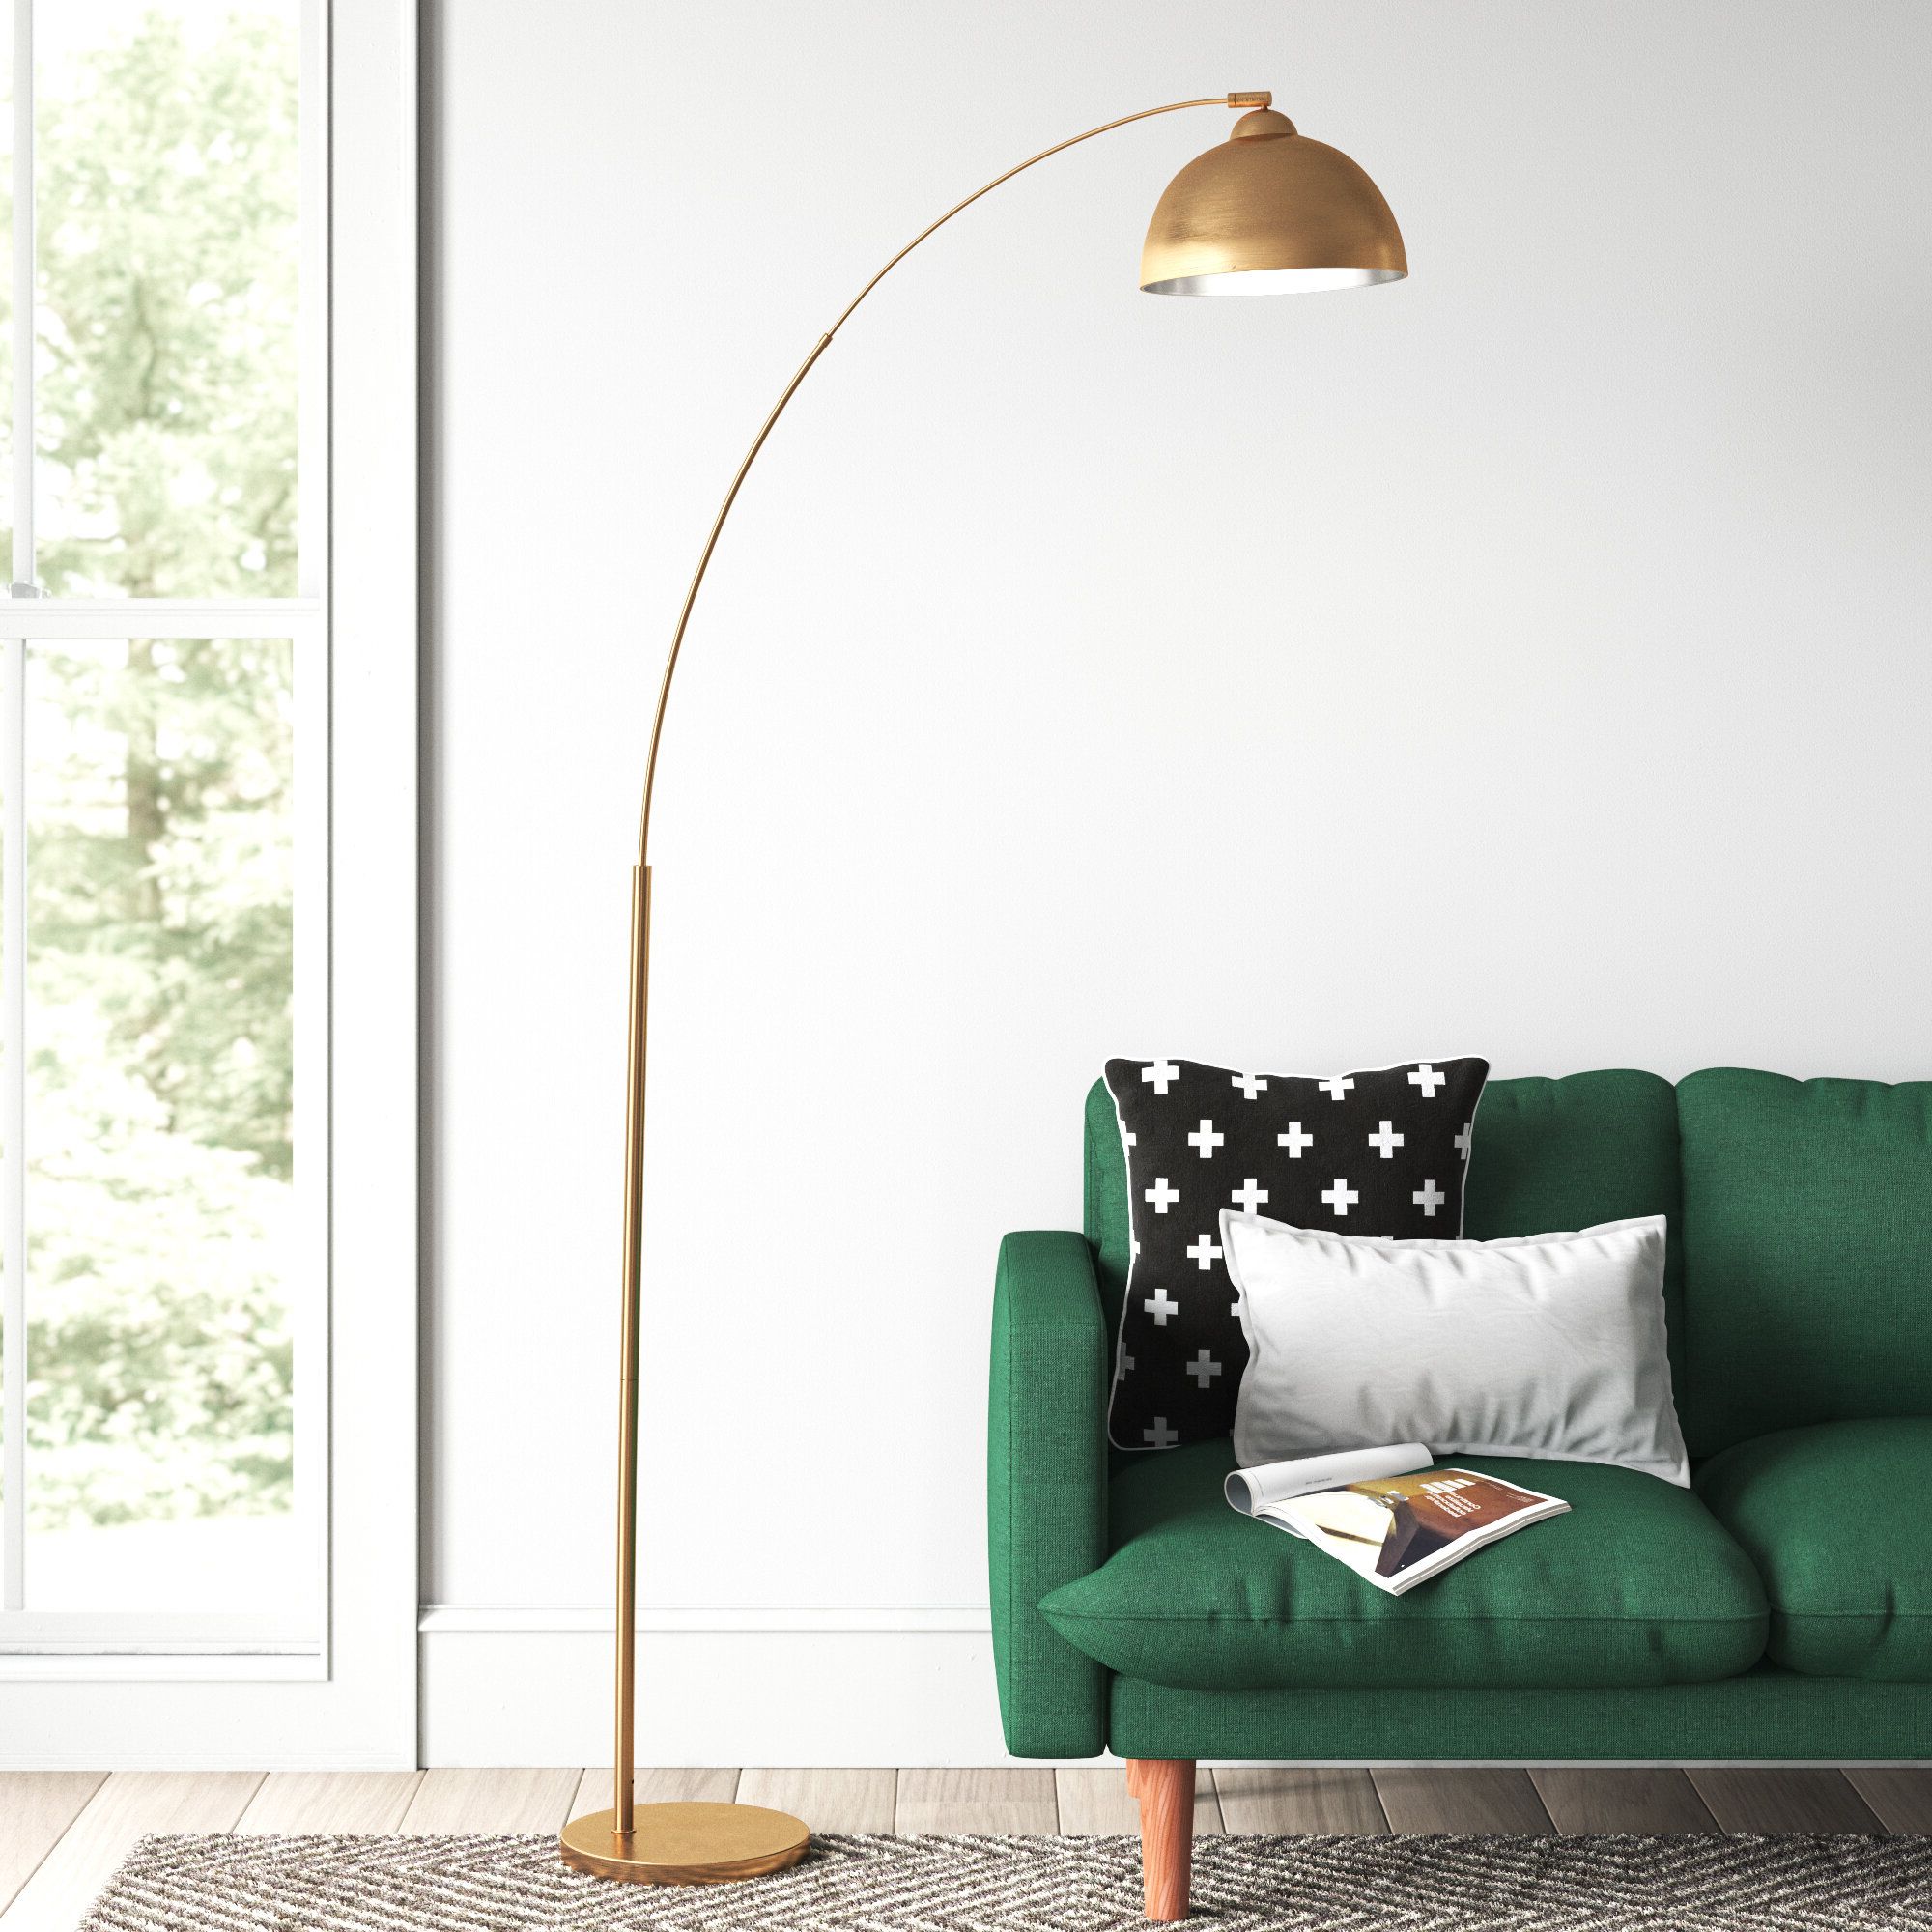 Wade Logan® Arenstein Angelray 79" Arched Floor Lamp & Reviews | Wayfair With Regard To Arc Floor Lamps (View 15 of 20)